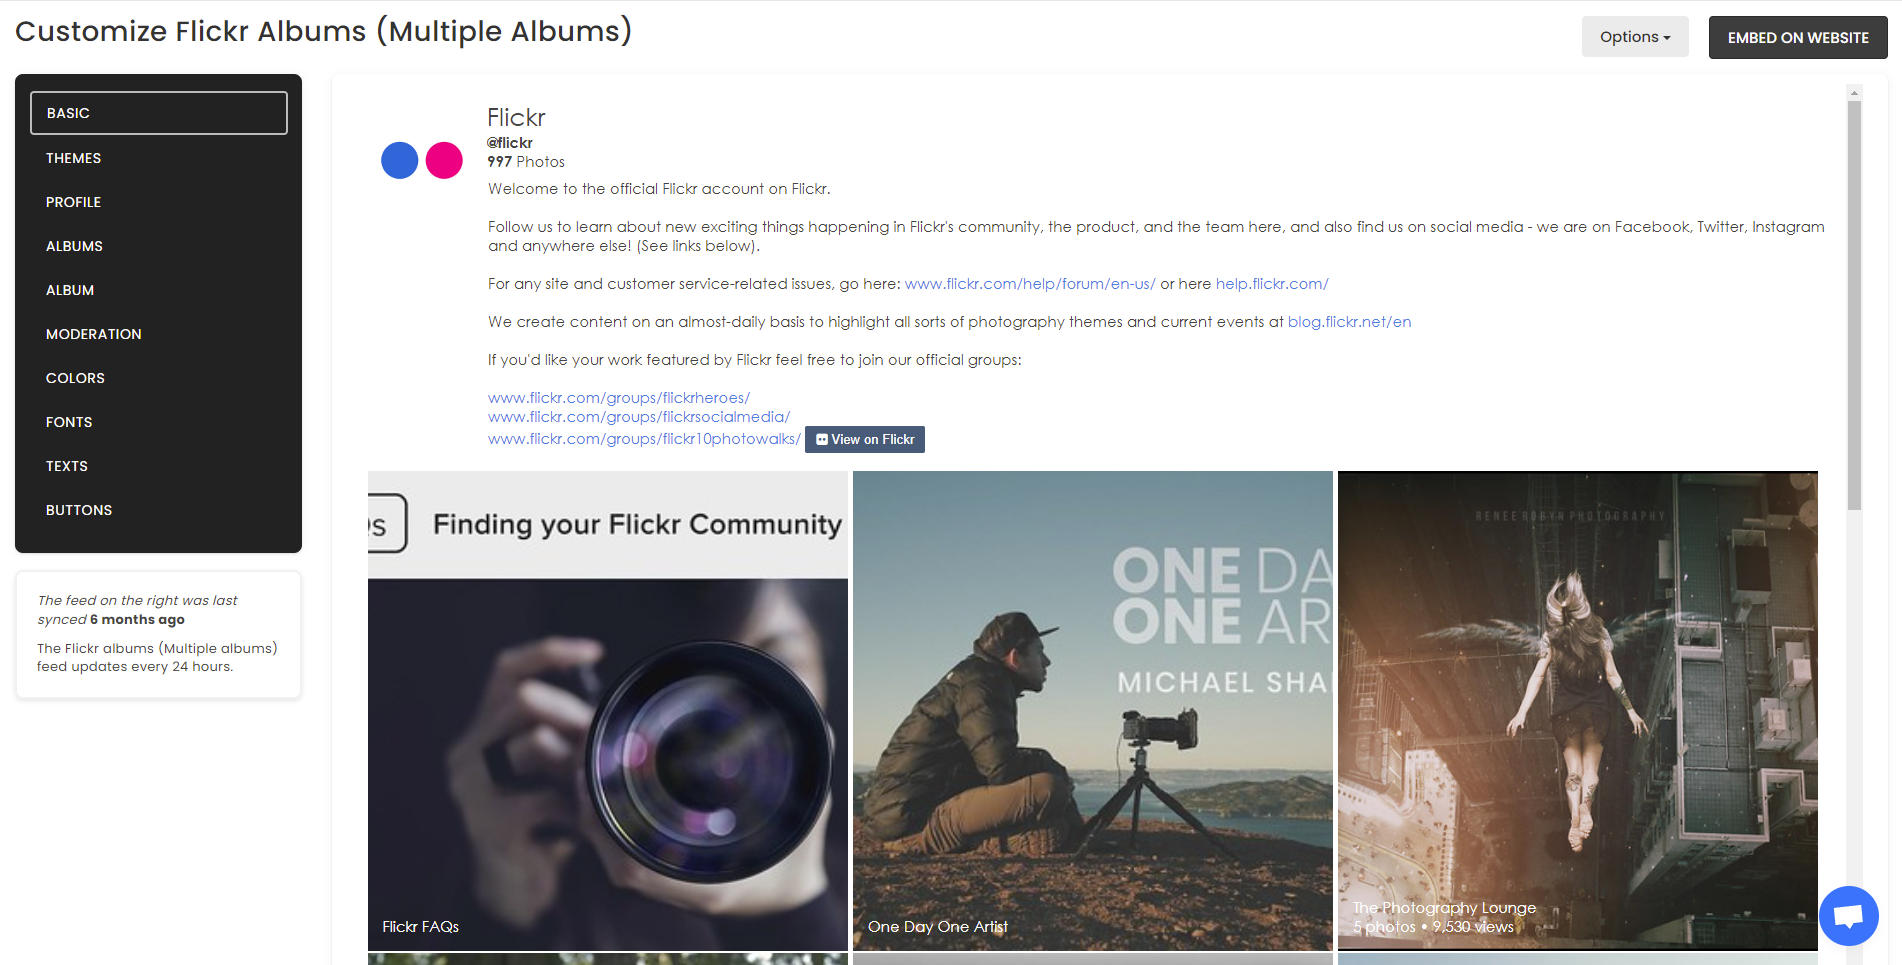 Customize your feed - How To Embed Flickr Albums (Multiple Albums) On Weebly Website For Free?